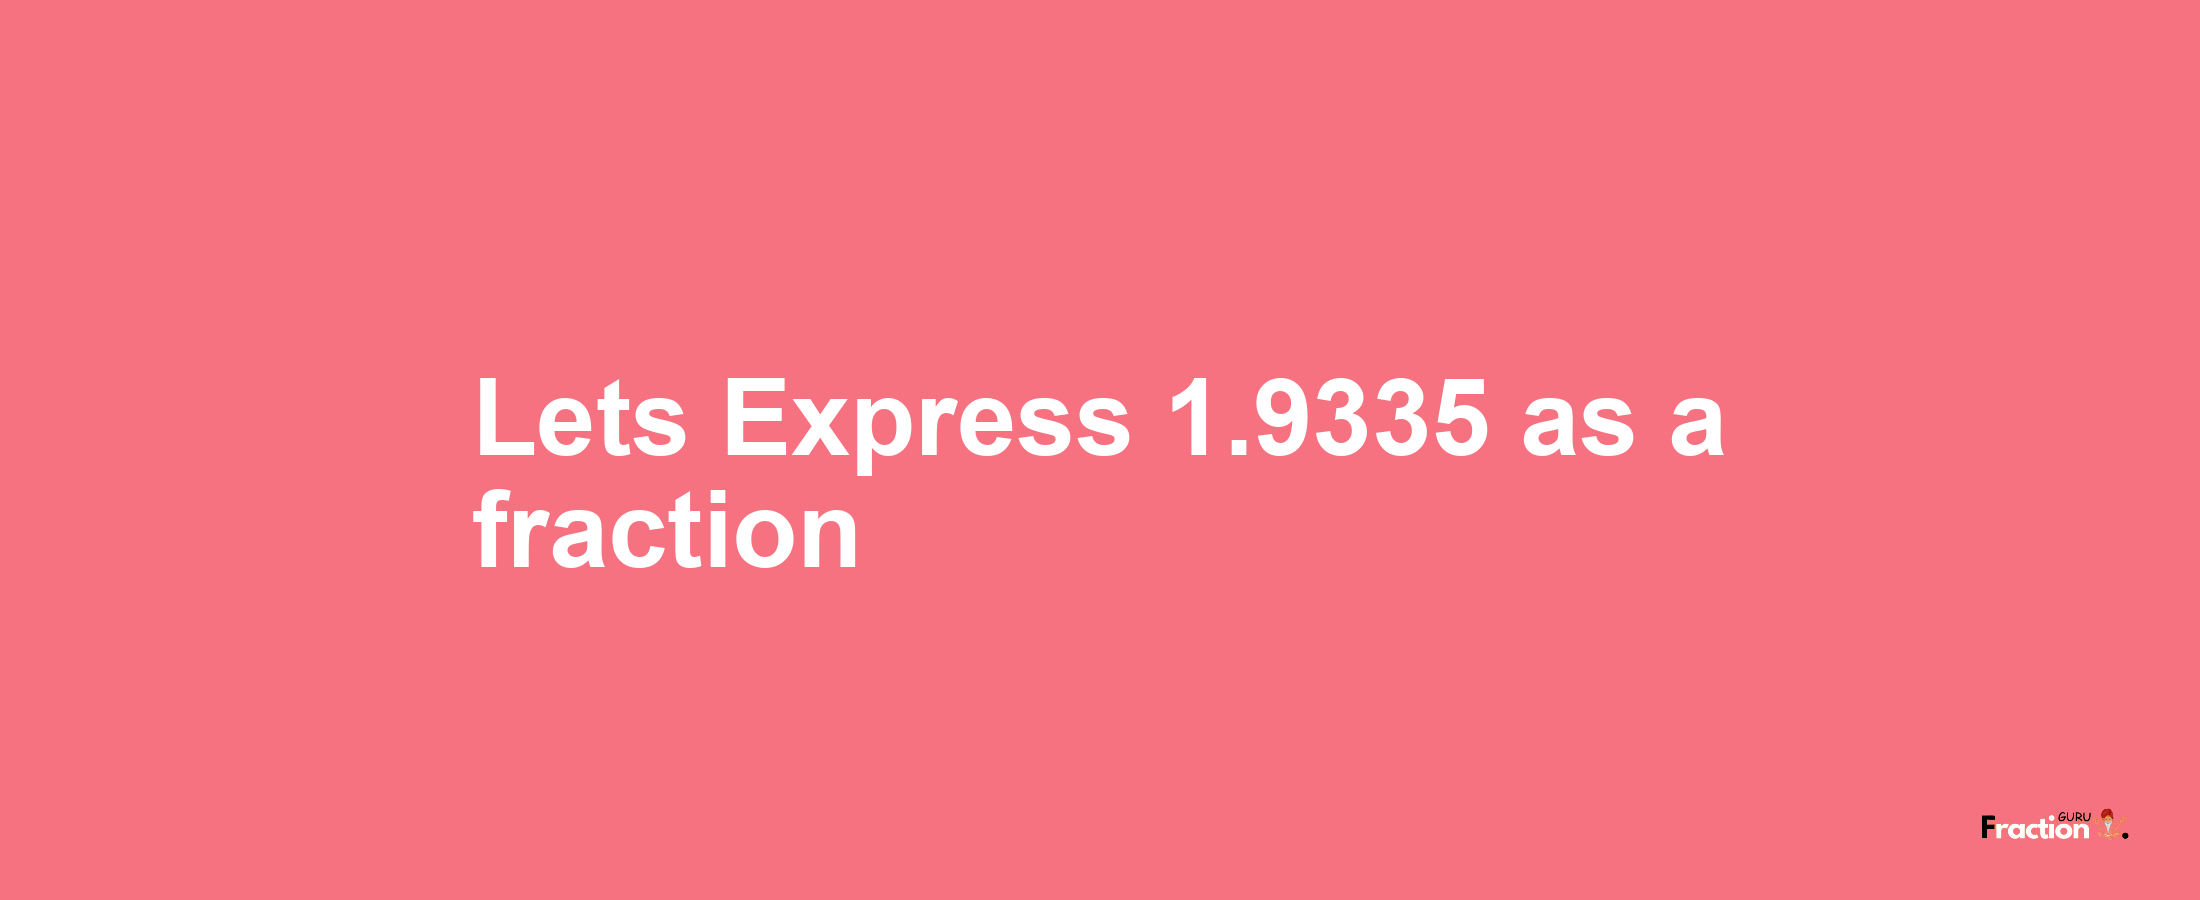 Lets Express 1.9335 as afraction